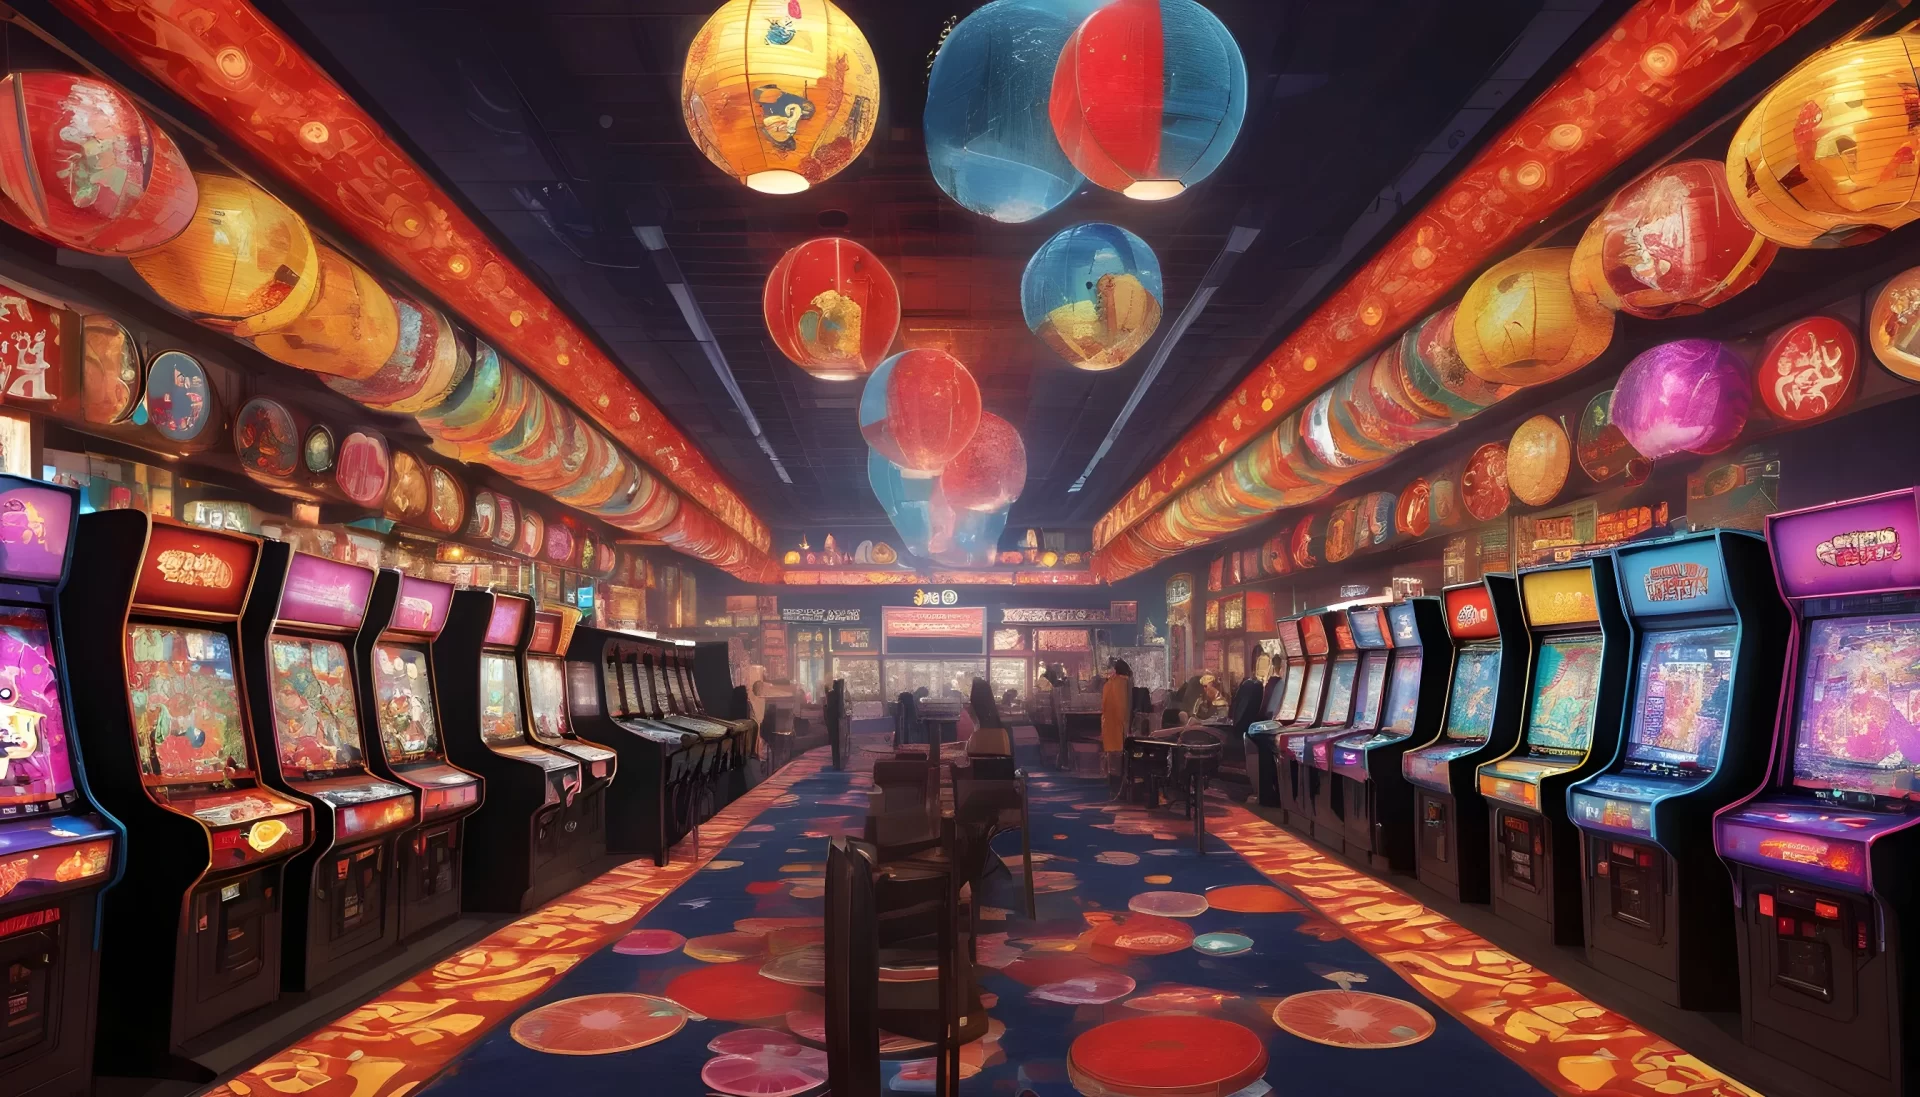 The Excitement Pachinko: Japan’s Beloved Arcade Game and Casino Hybrid